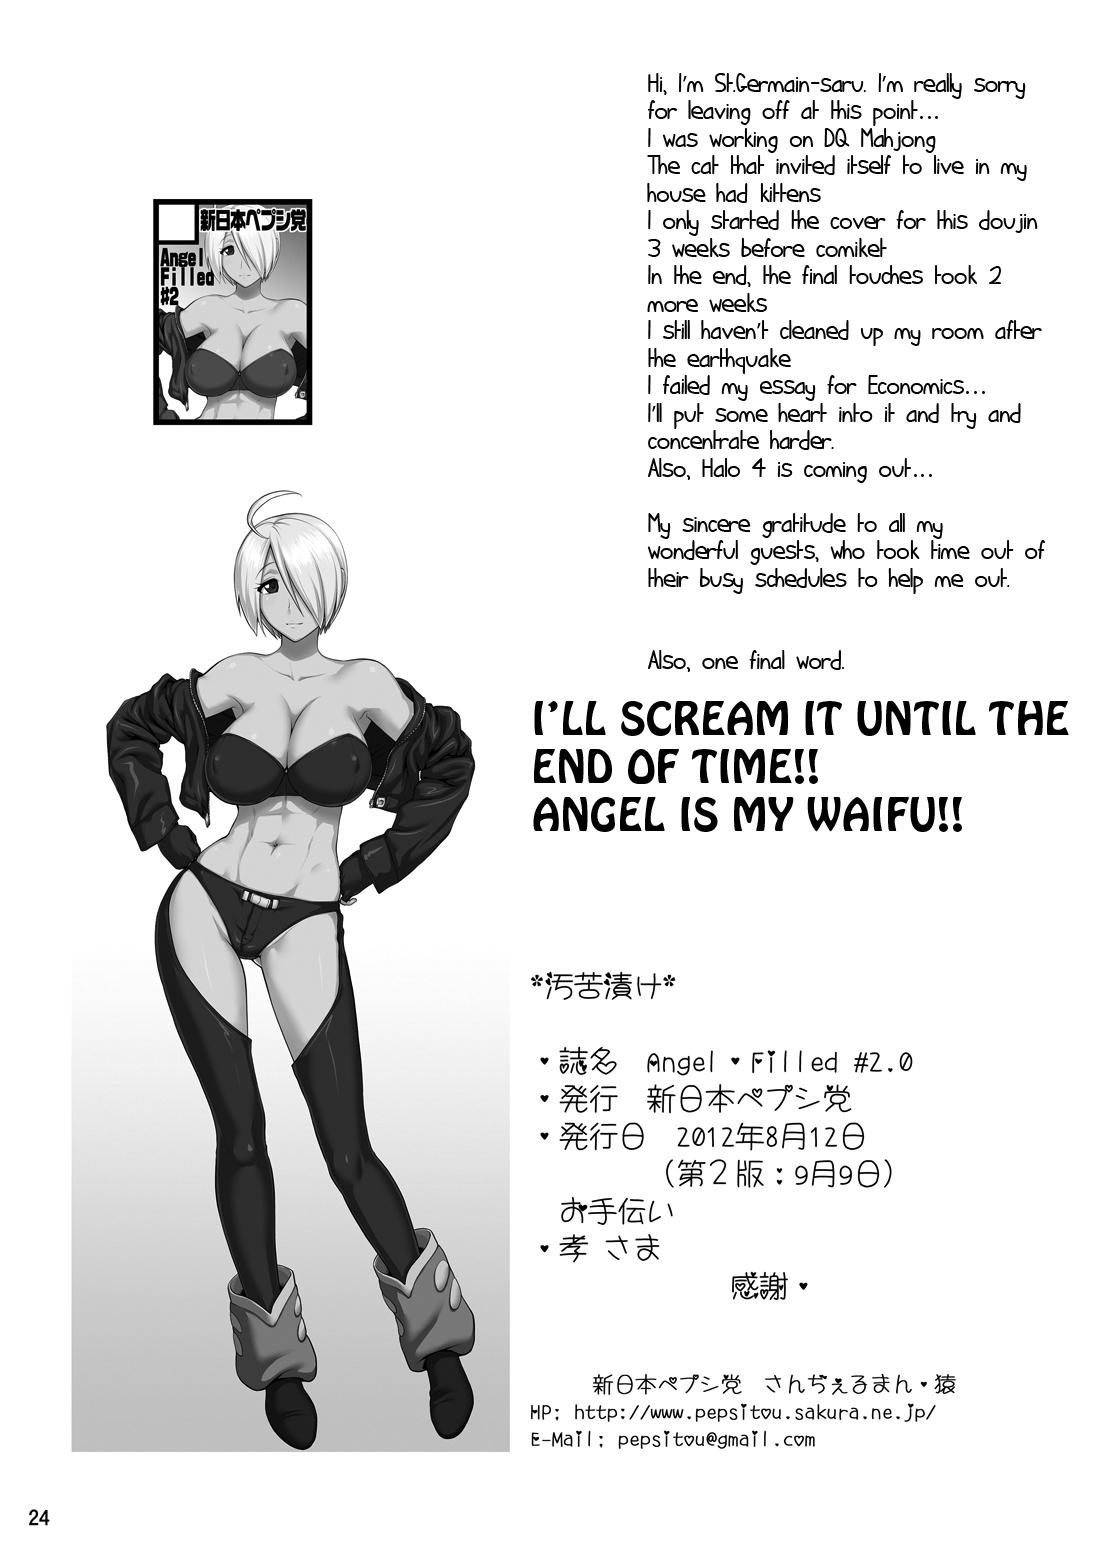 Vergon Angel Filled #2.0 - King of fighters Blowjobs - Page 25